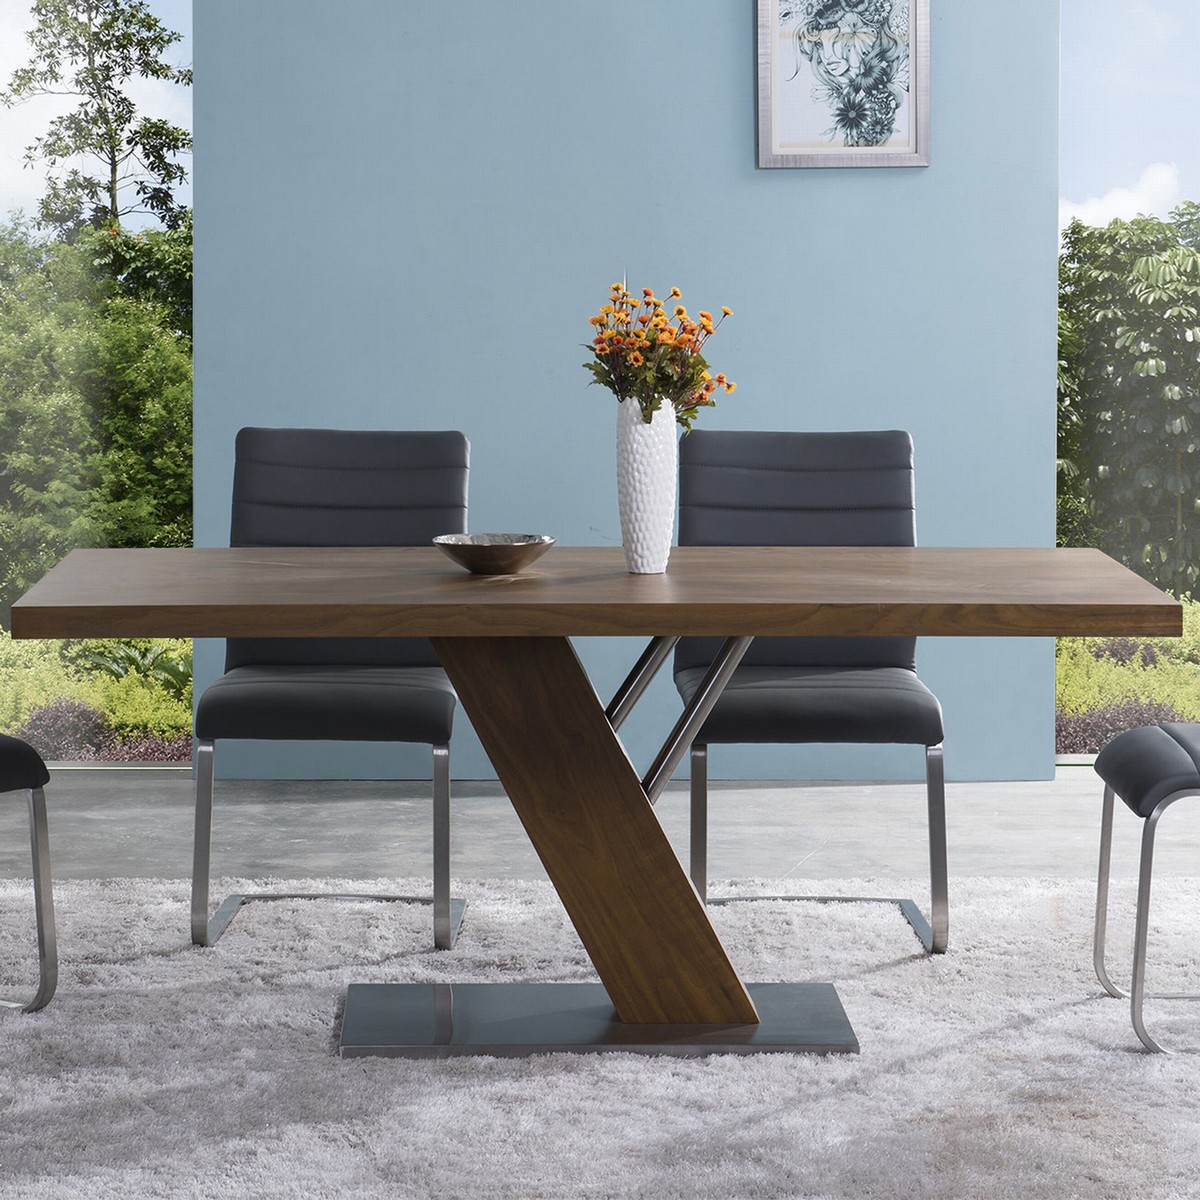 Armen Living Fusion Contemporary Dining Table In Walnut Wood Top and Stainless Steel